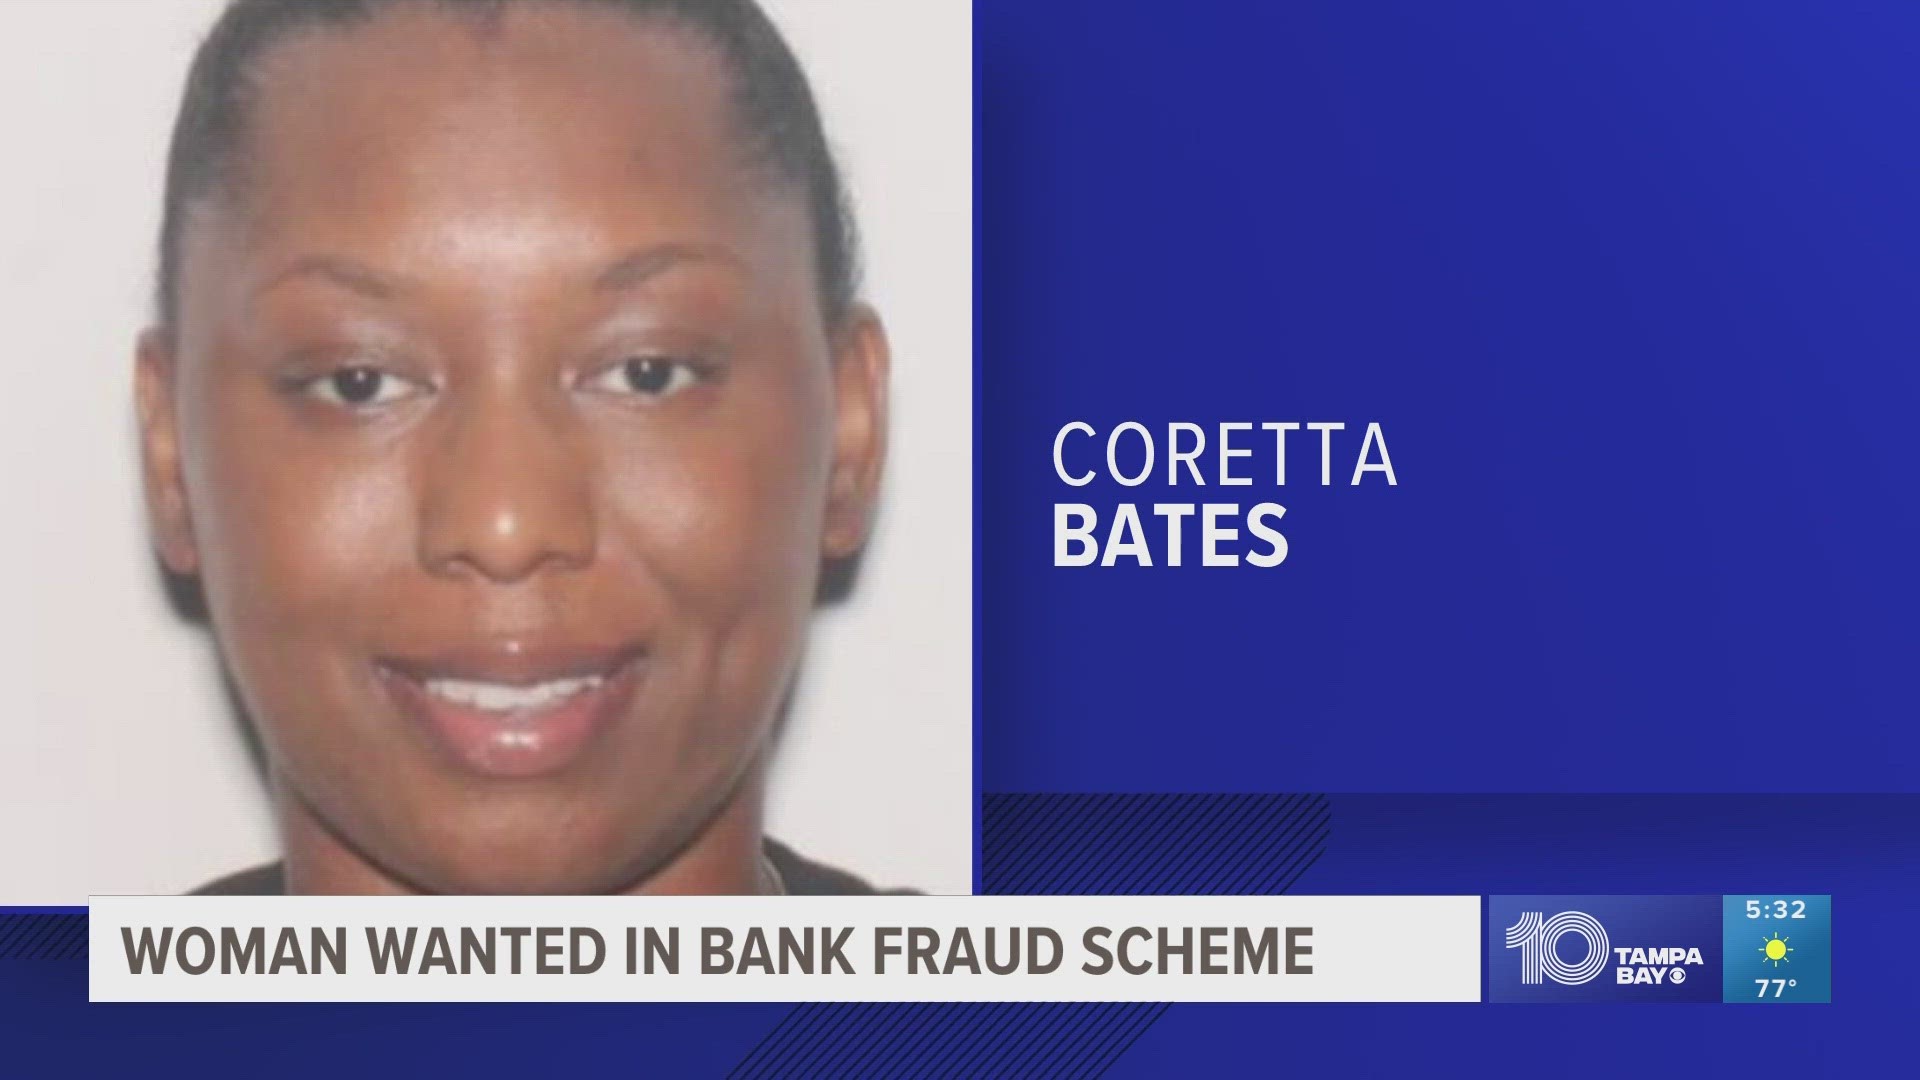 Authorities say Coretta Bates is responsible for stealing more than $165,000 by opening bank accounts in peoples' names.